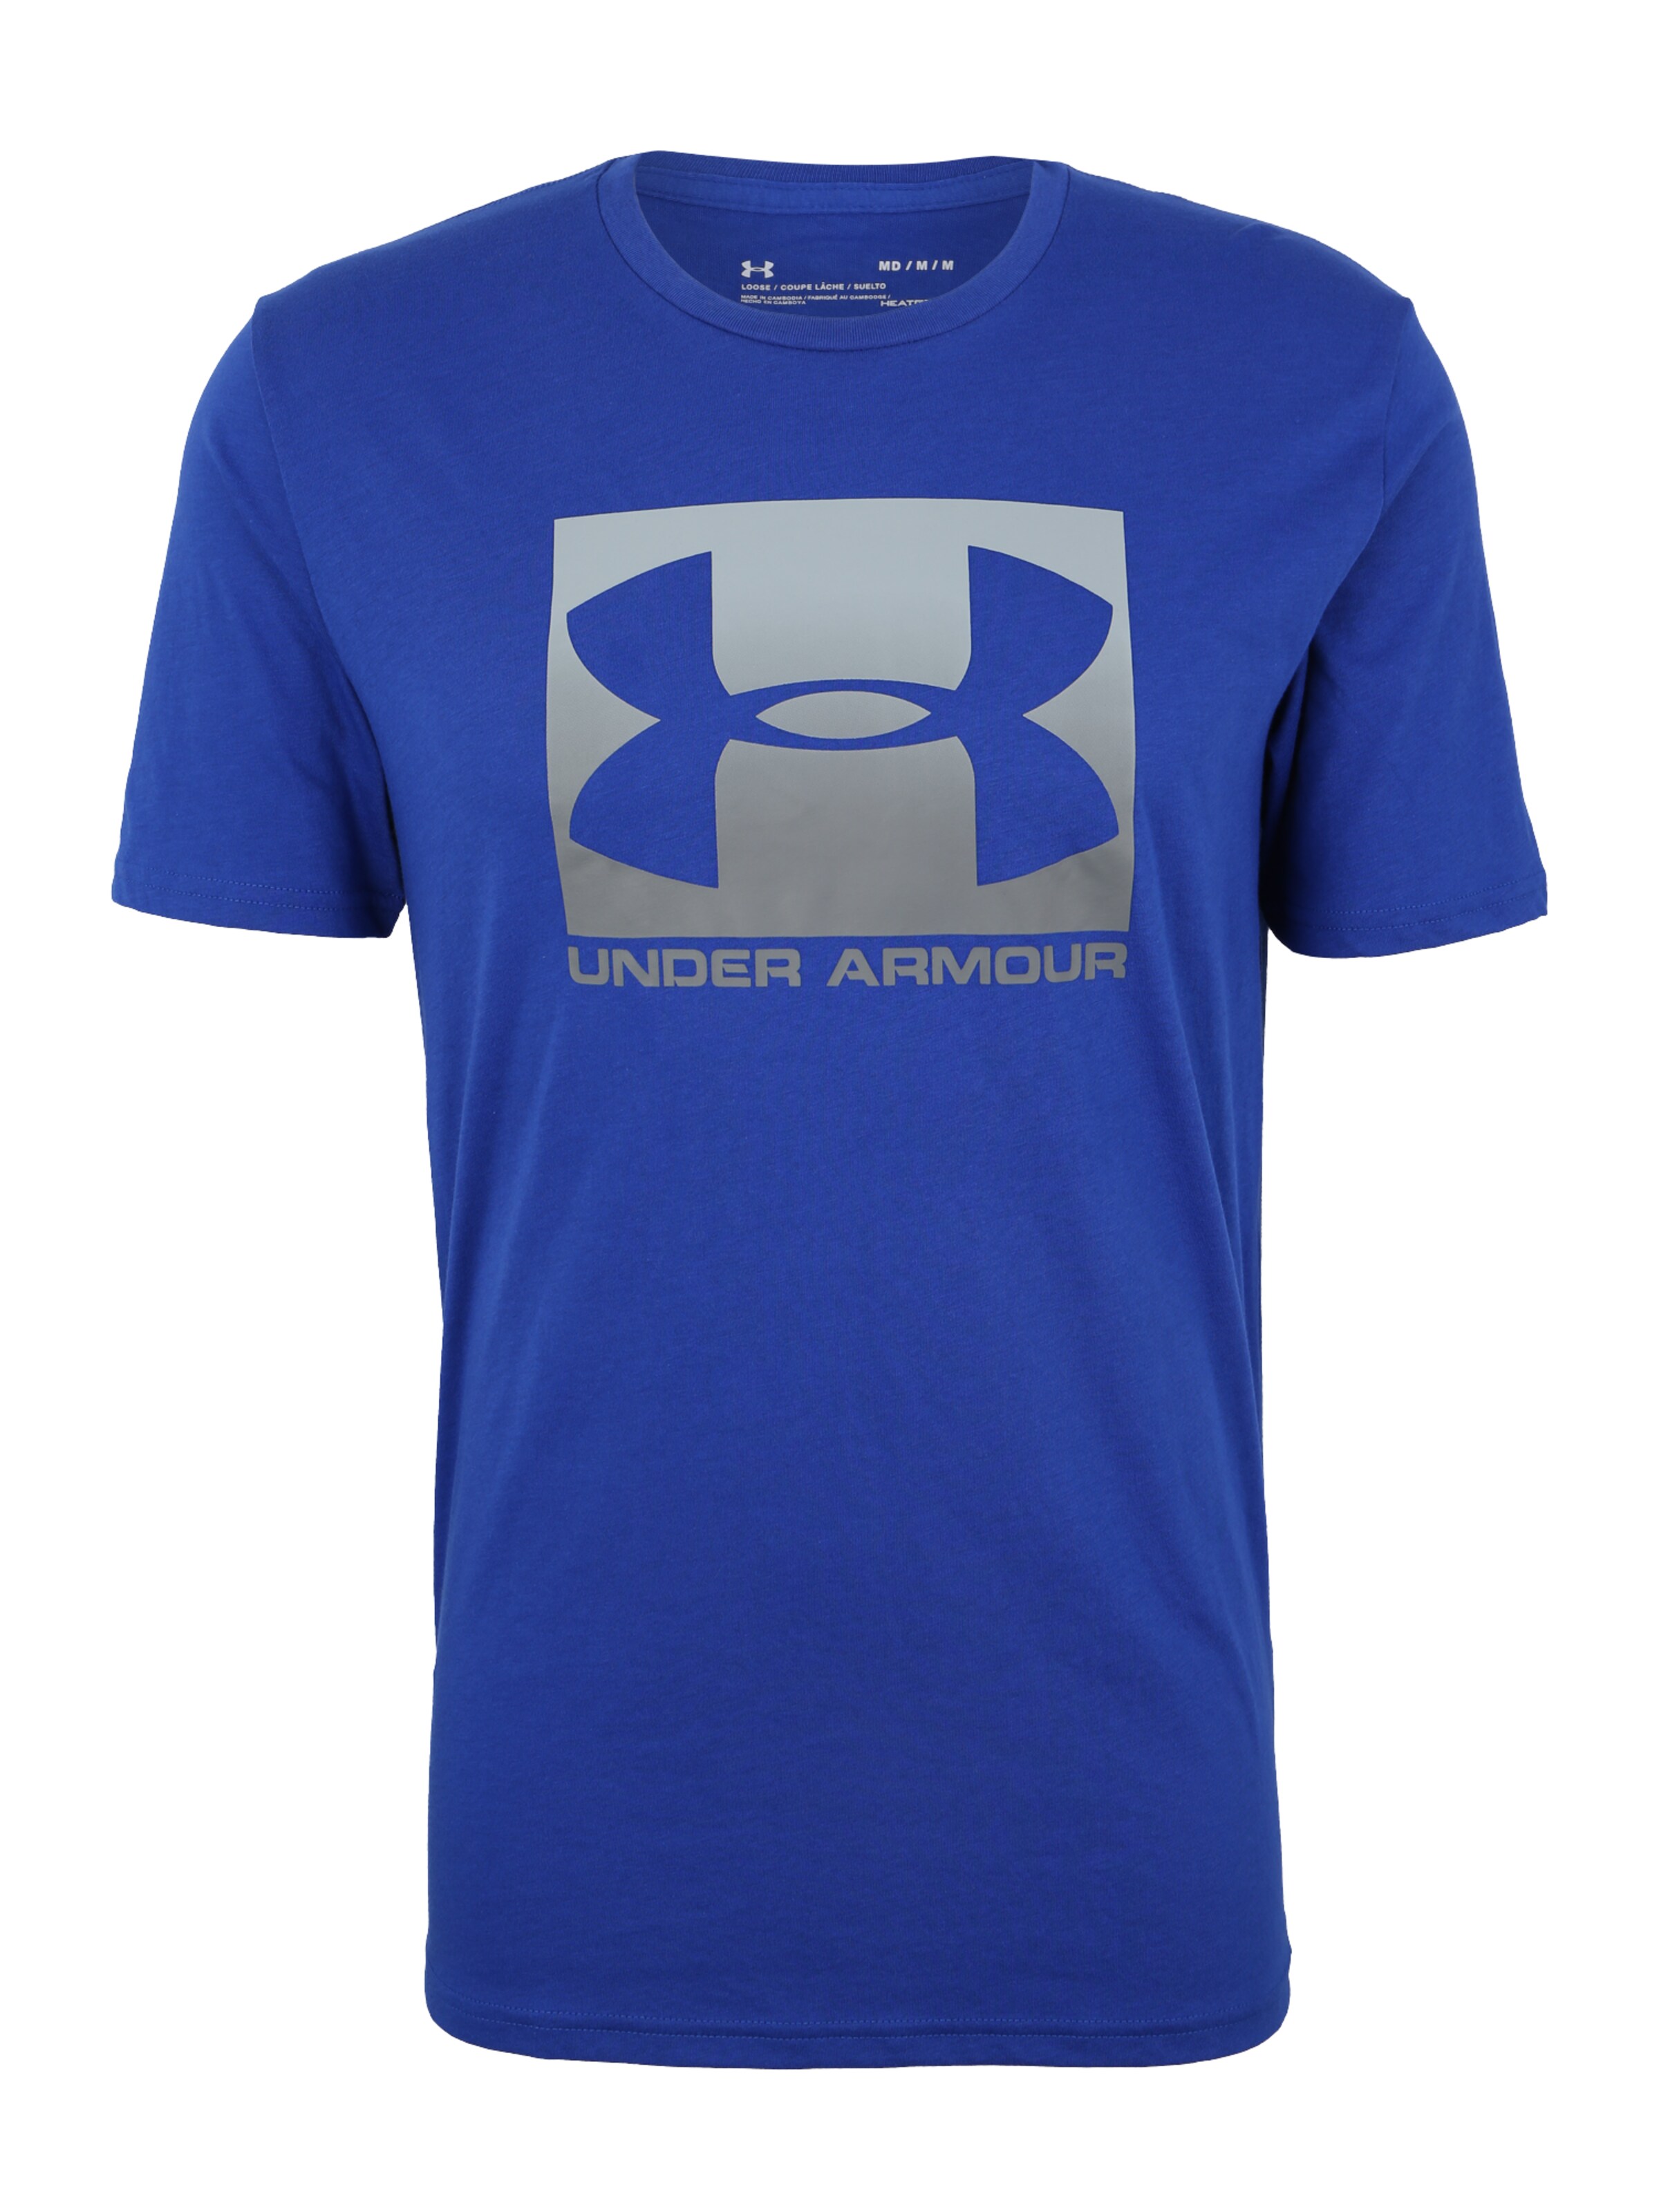 Men Sports | UNDER ARMOUR Performance Shirt in Blue - CW86770